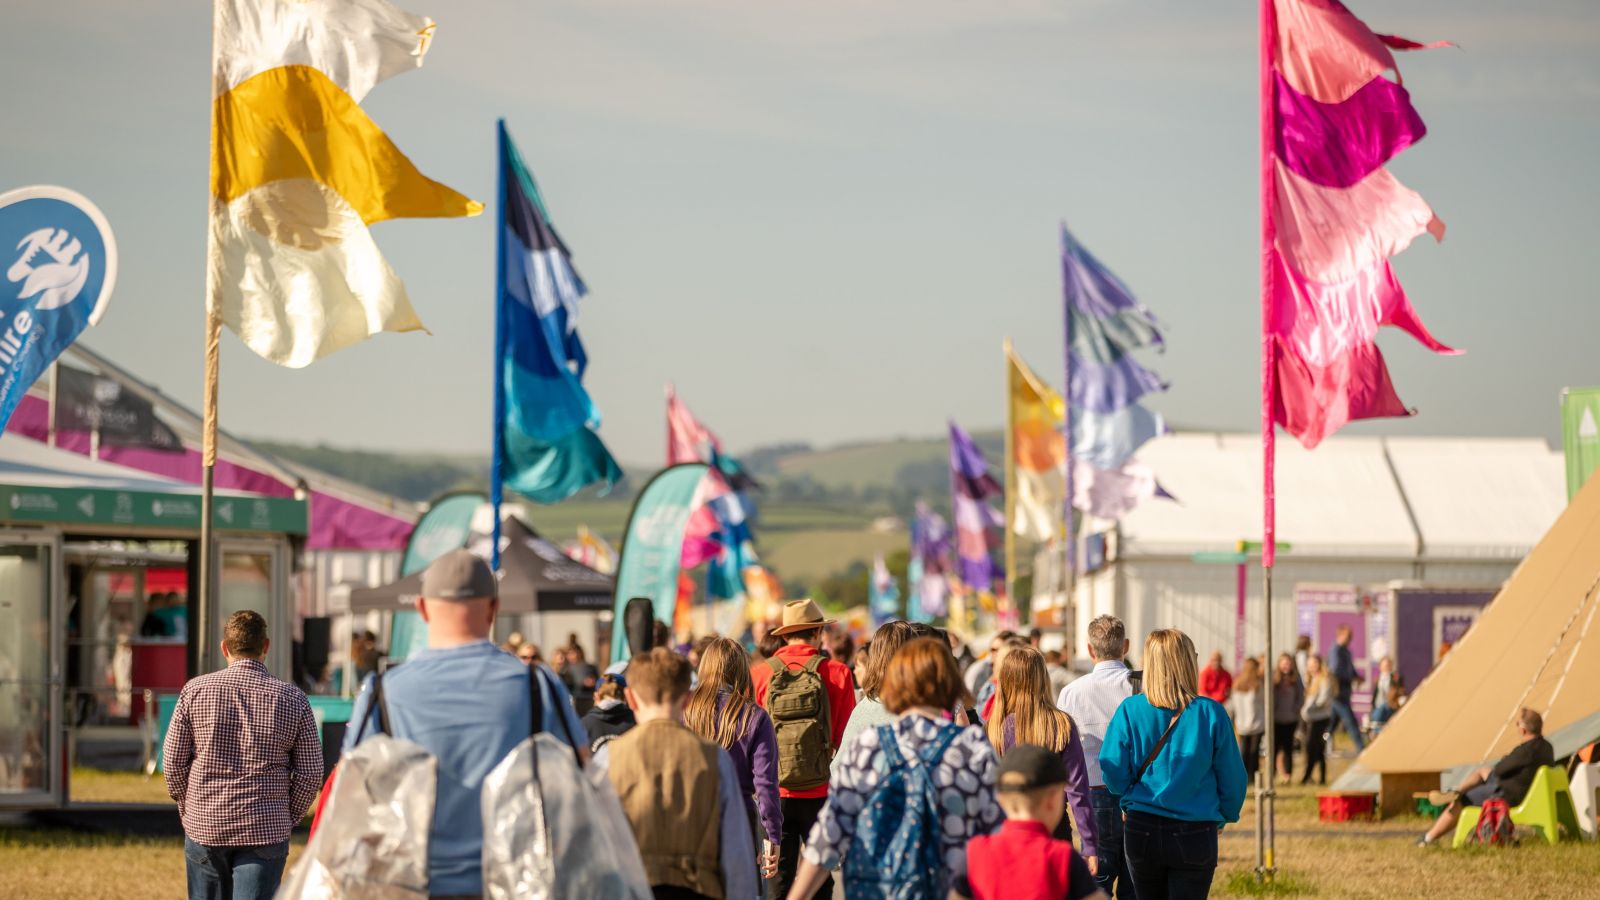 Free entry for low-income families to the 2023 Carmarthenshire Urdd Eisteddfod